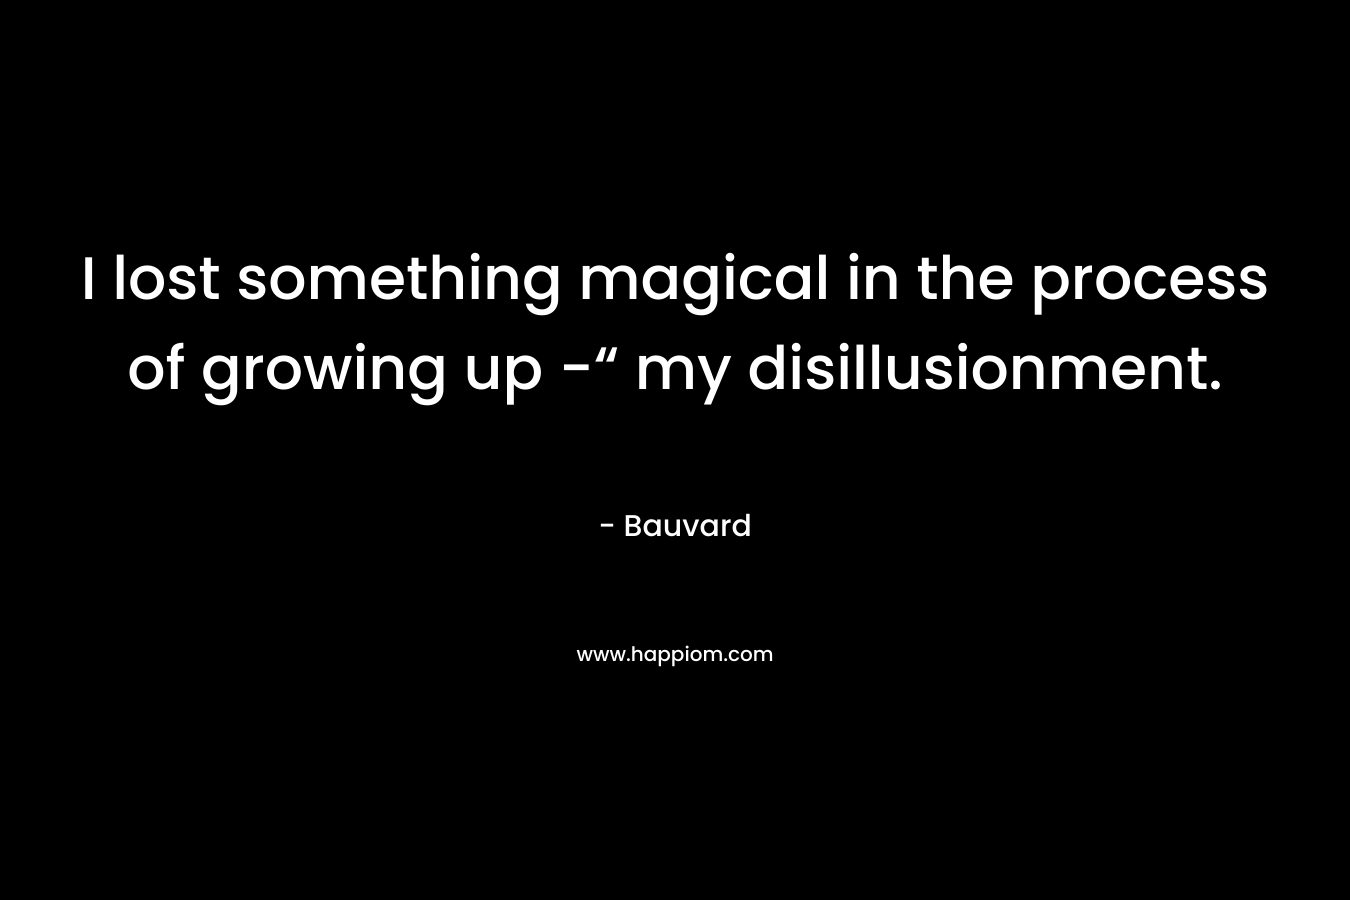 I lost something magical in the process of growing up -“ my disillusionment.